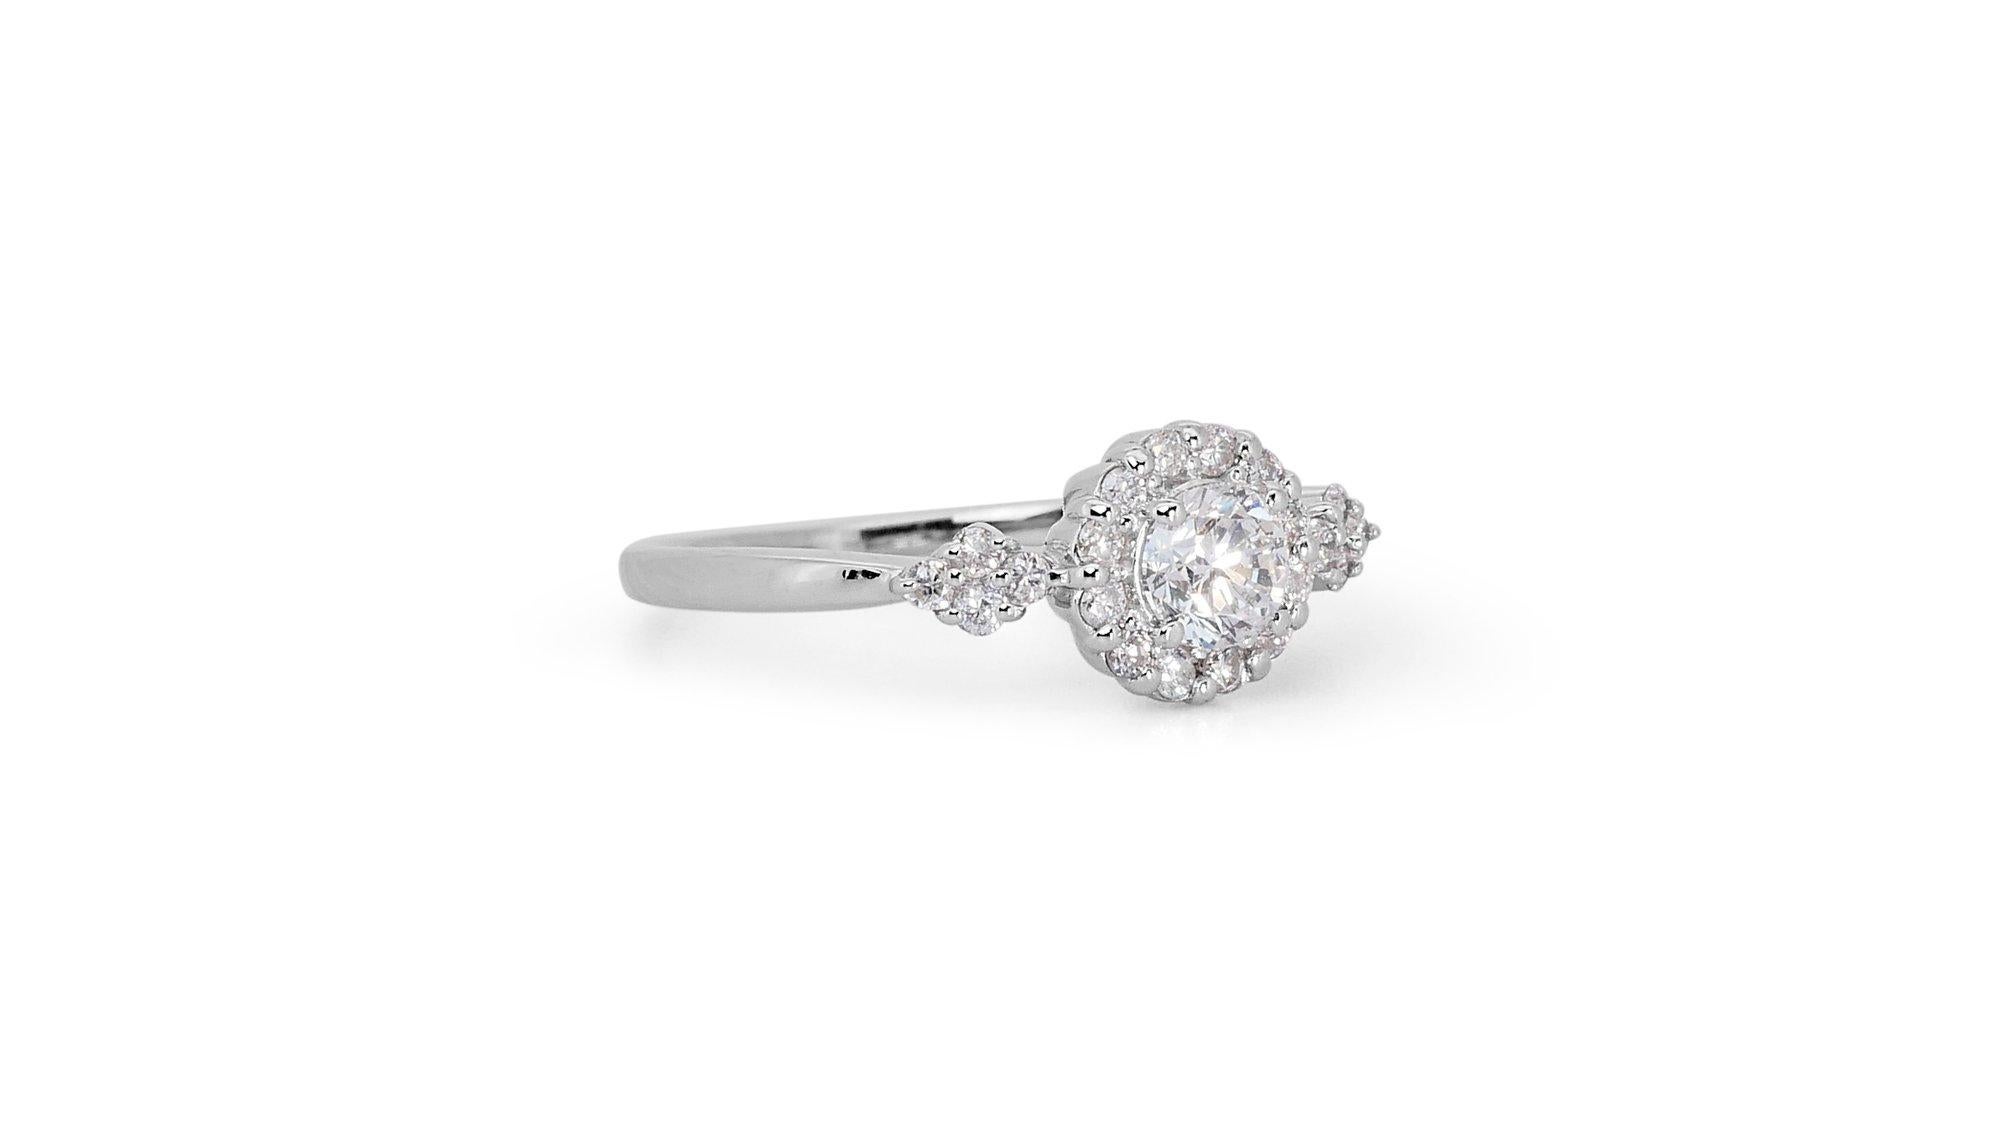 Fascinating 18k White Gold Natural Diamond Halo Ring w/0.72 ct - GIA Certified

Introducing this fascinating diamond halo ring that embodies timeless elegance and brilliance. Featuring a stunning 0.70 carat round diamond center stone nestled within